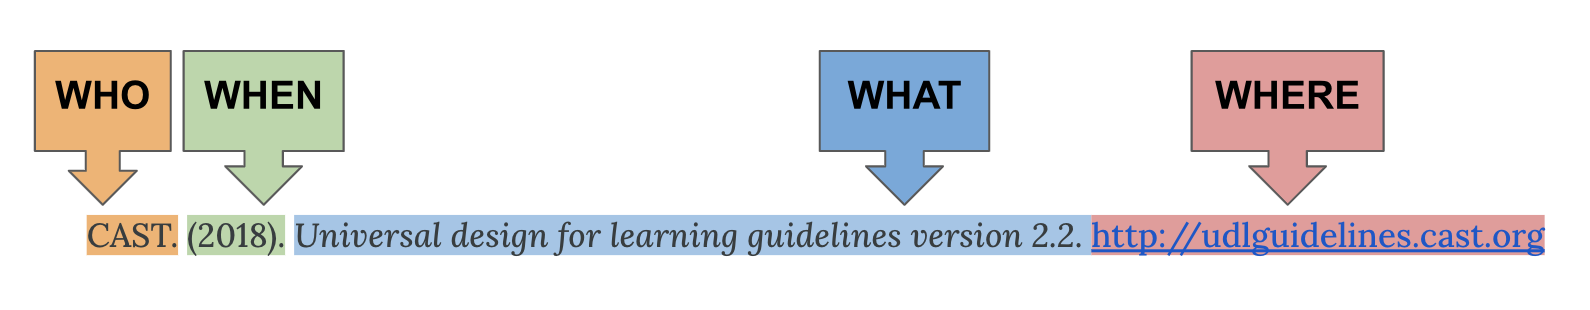 Reference citation for a webpage highlighted in different colours and labels for each 4W: who, when, what, where. Citation is CAST. (2018). Universal design for learning guidelines version 2.2. http://udlguidelines.cast.org/